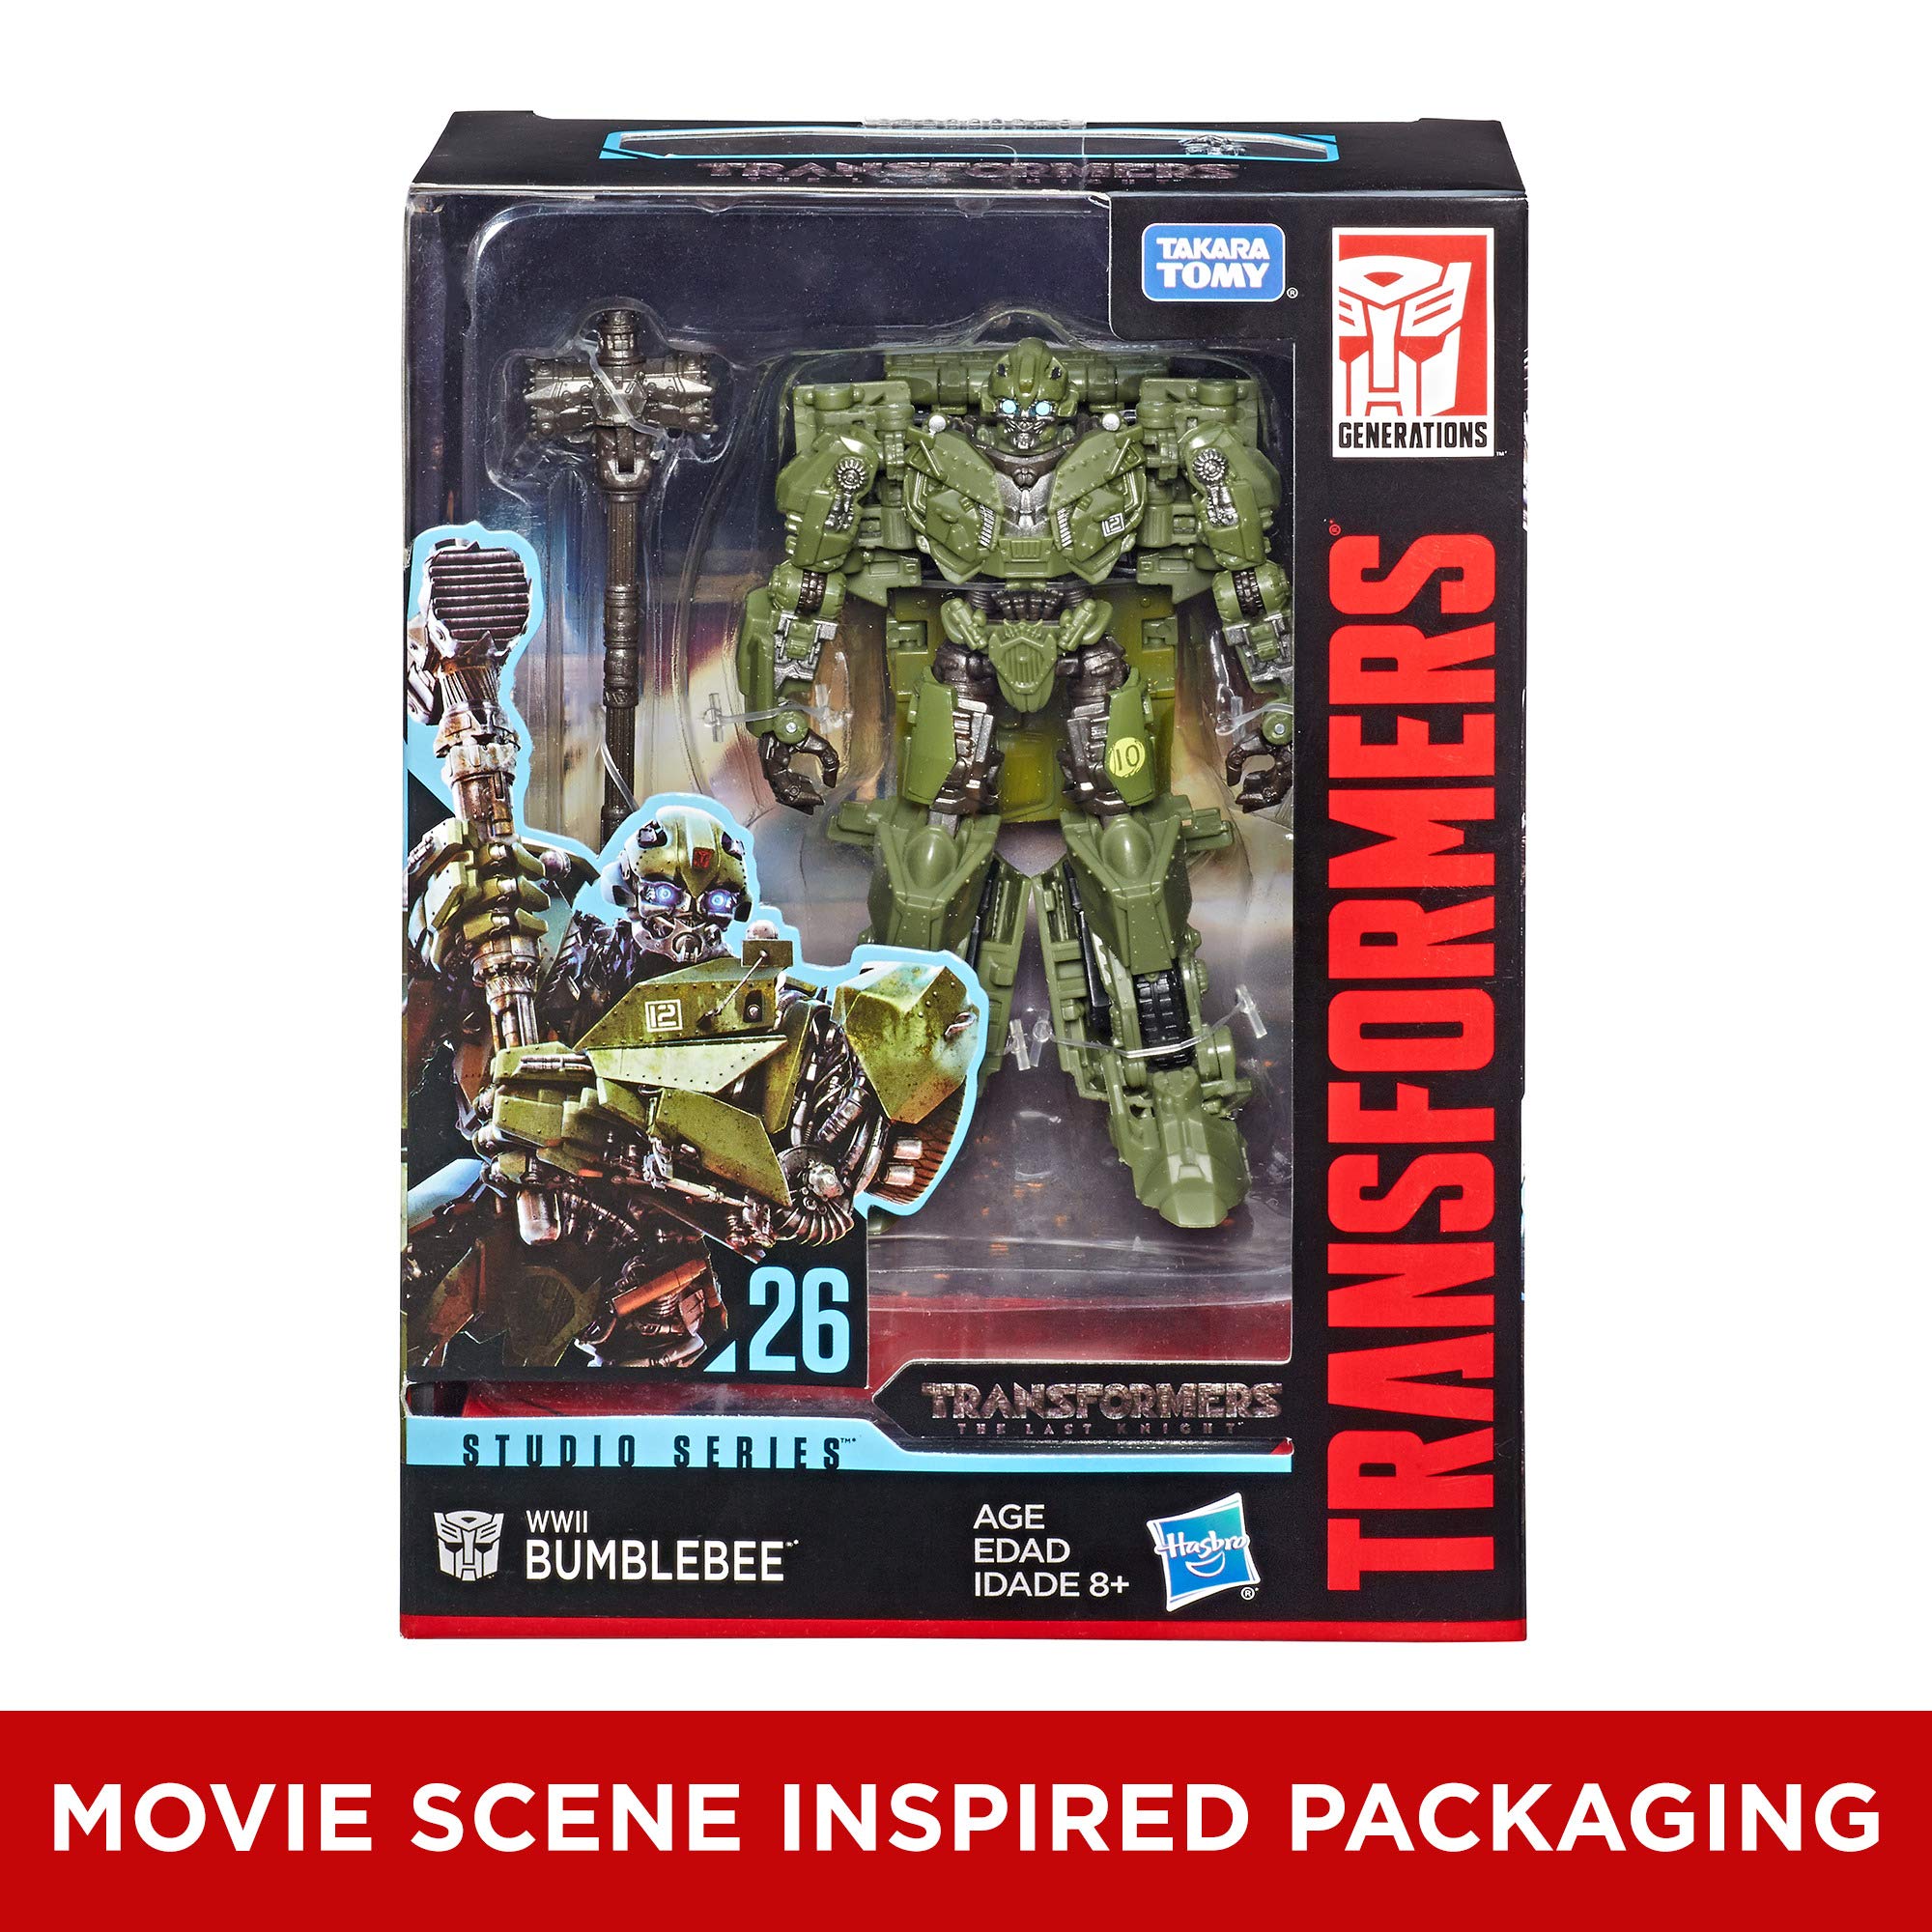 Transformers Studio Series 26 Deluxe Class The Last Knight Wii Bumblebee Action Figure